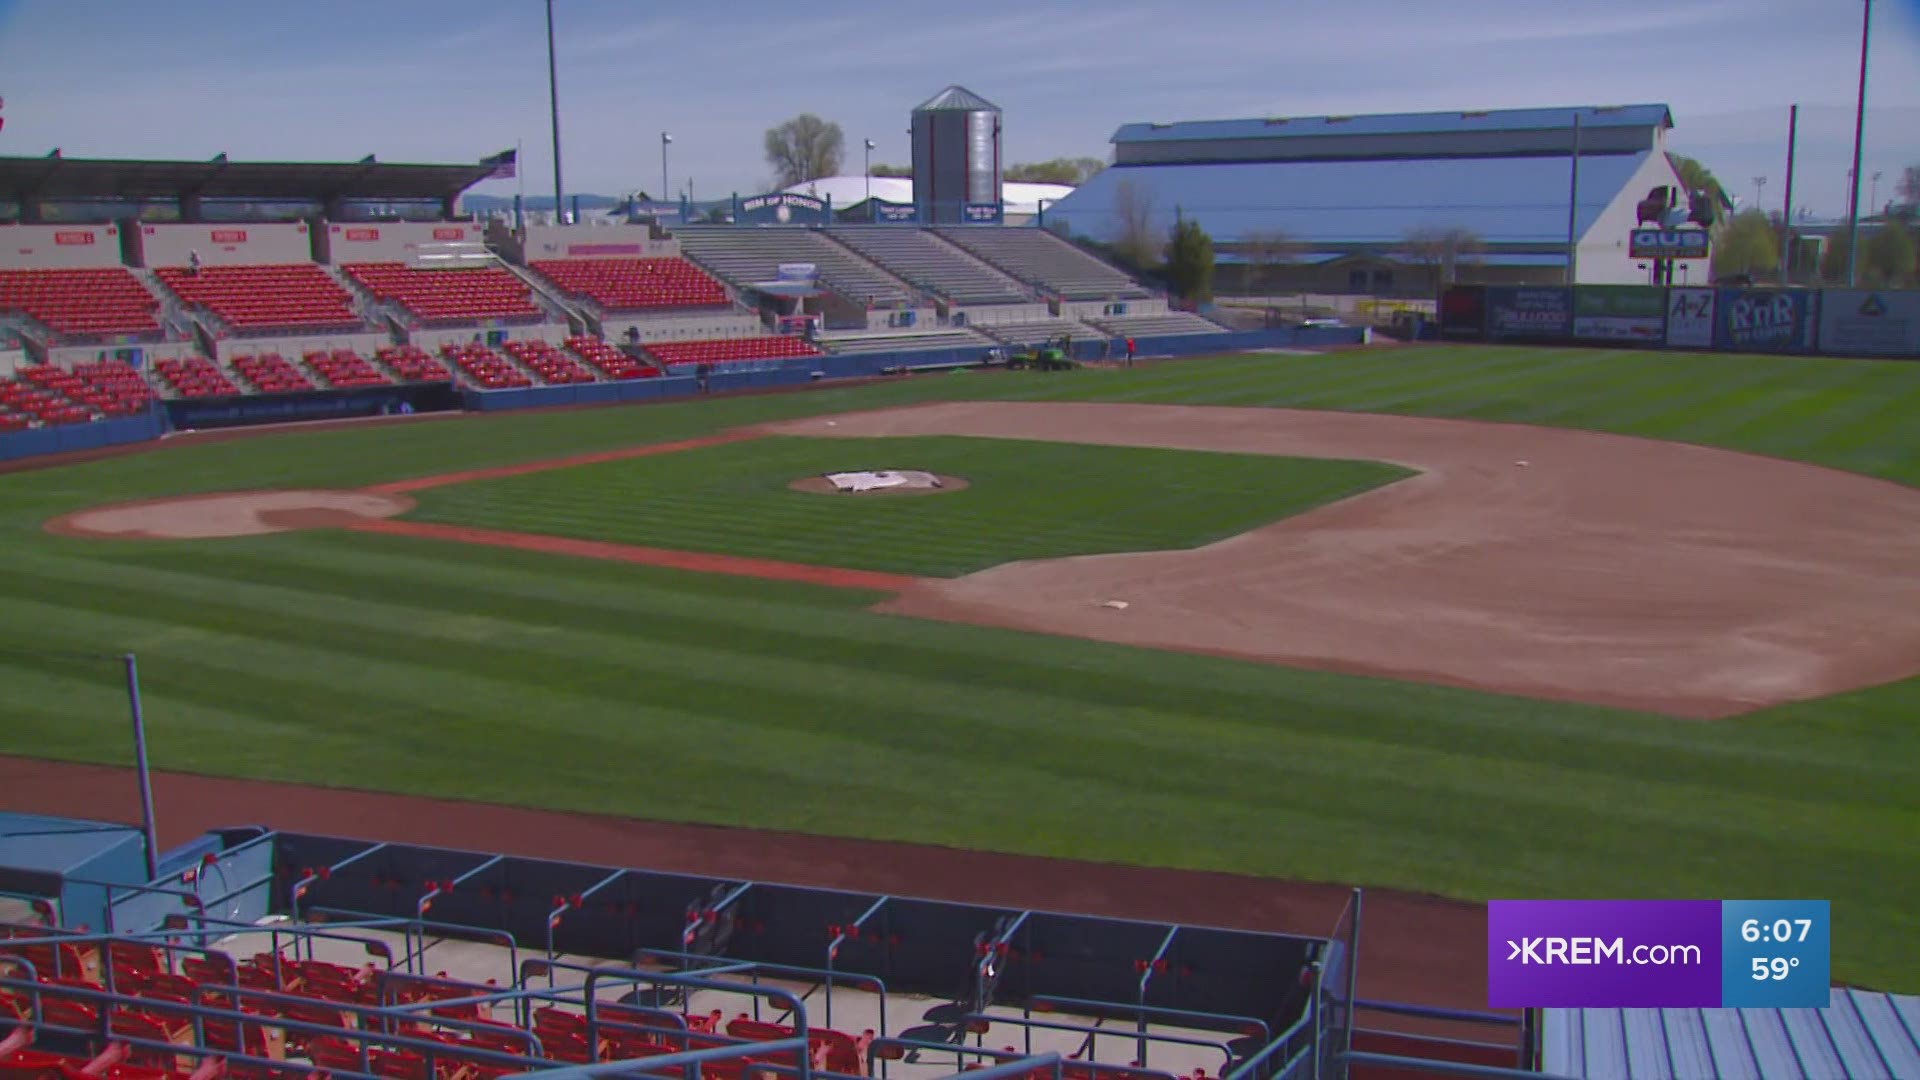 The Spokane Indians will not require fans to show proof of vaccination at Avista Stadium and will rely on the honor system.